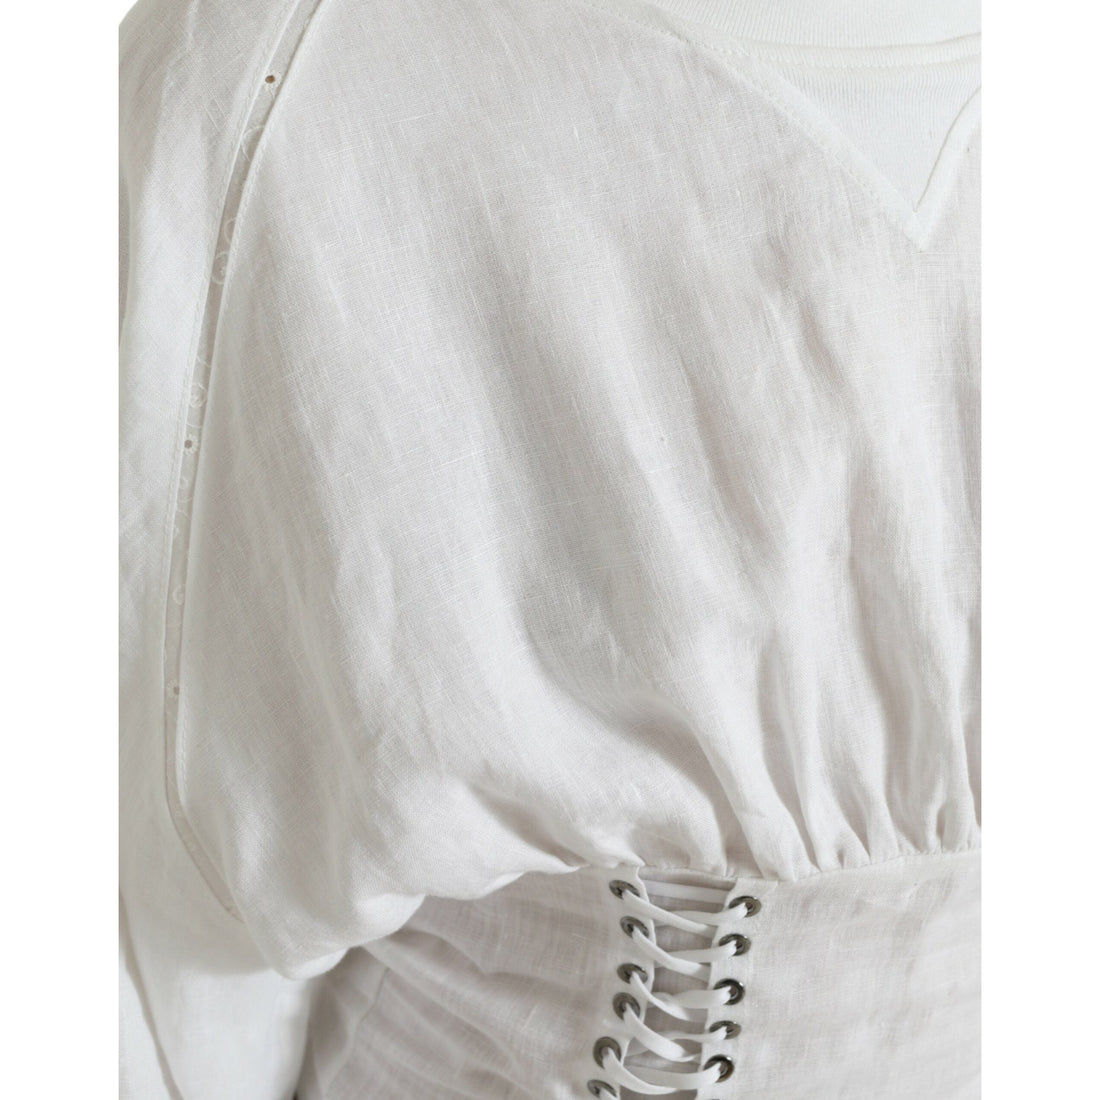 Dolce & Gabbana White Cotton Corset Cropped Long Sleeves Top